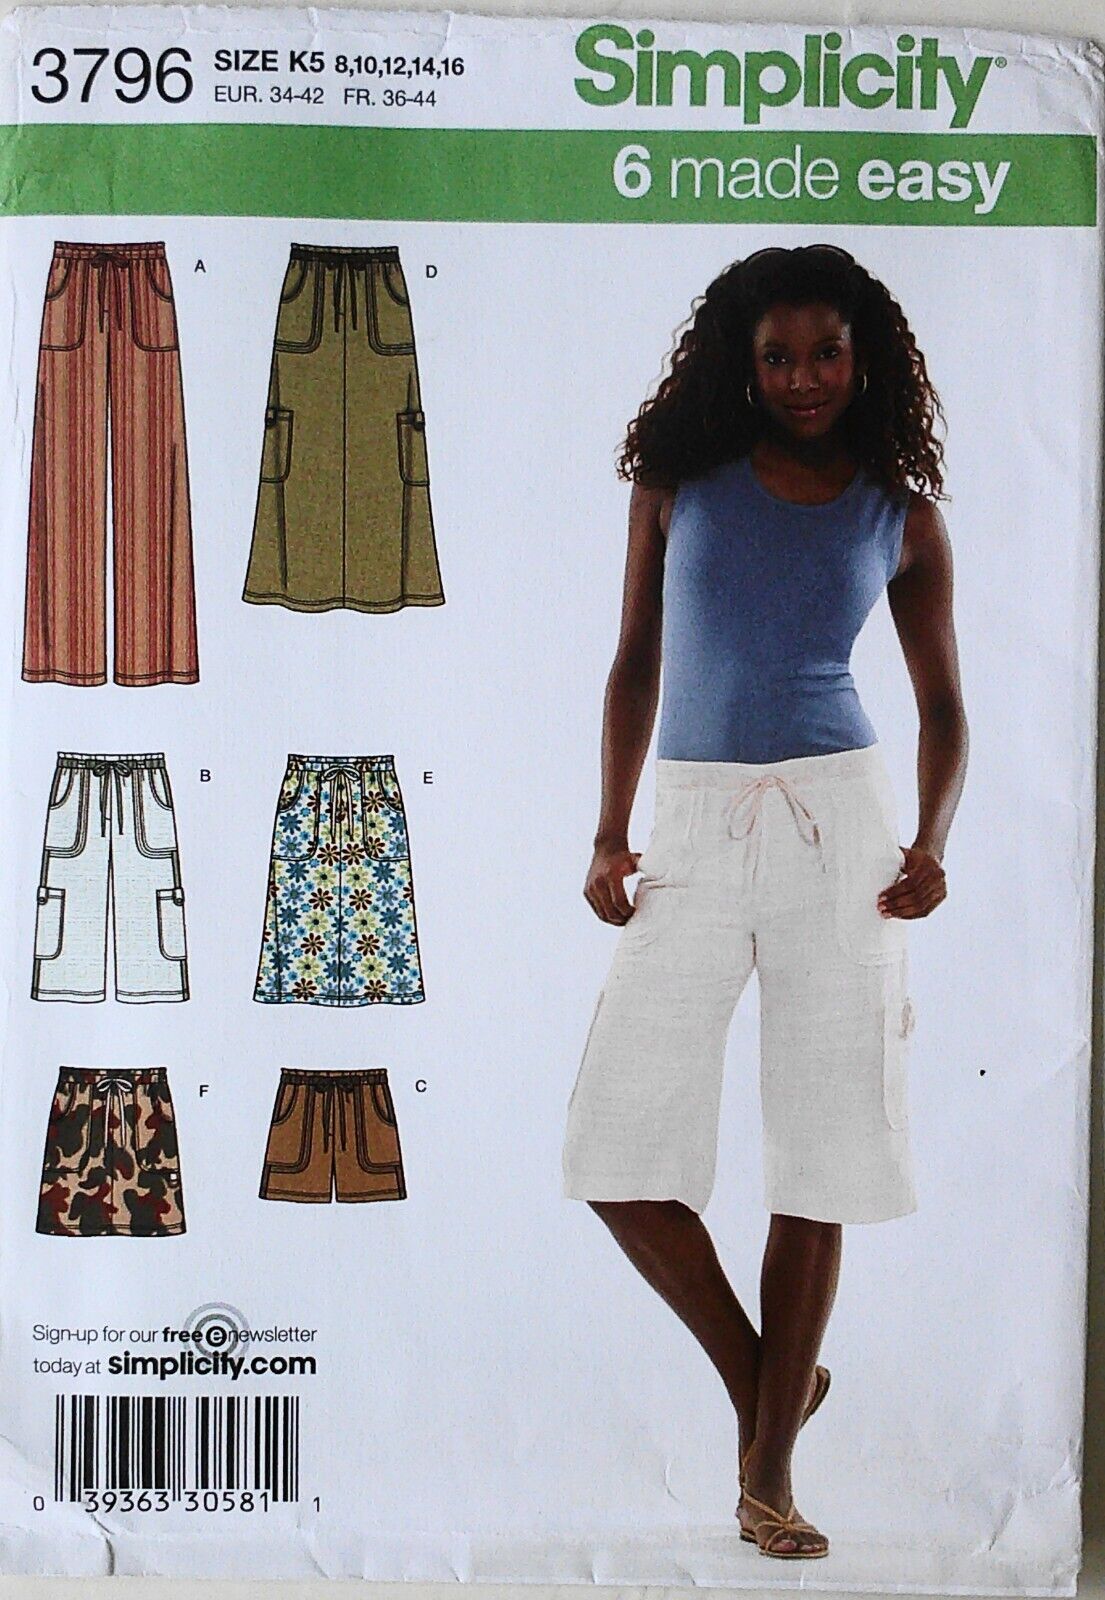 Simplicity 3796 Misses 6 Made Easy Skirts Pants Shorts Sewing Pattern Sz 8-16